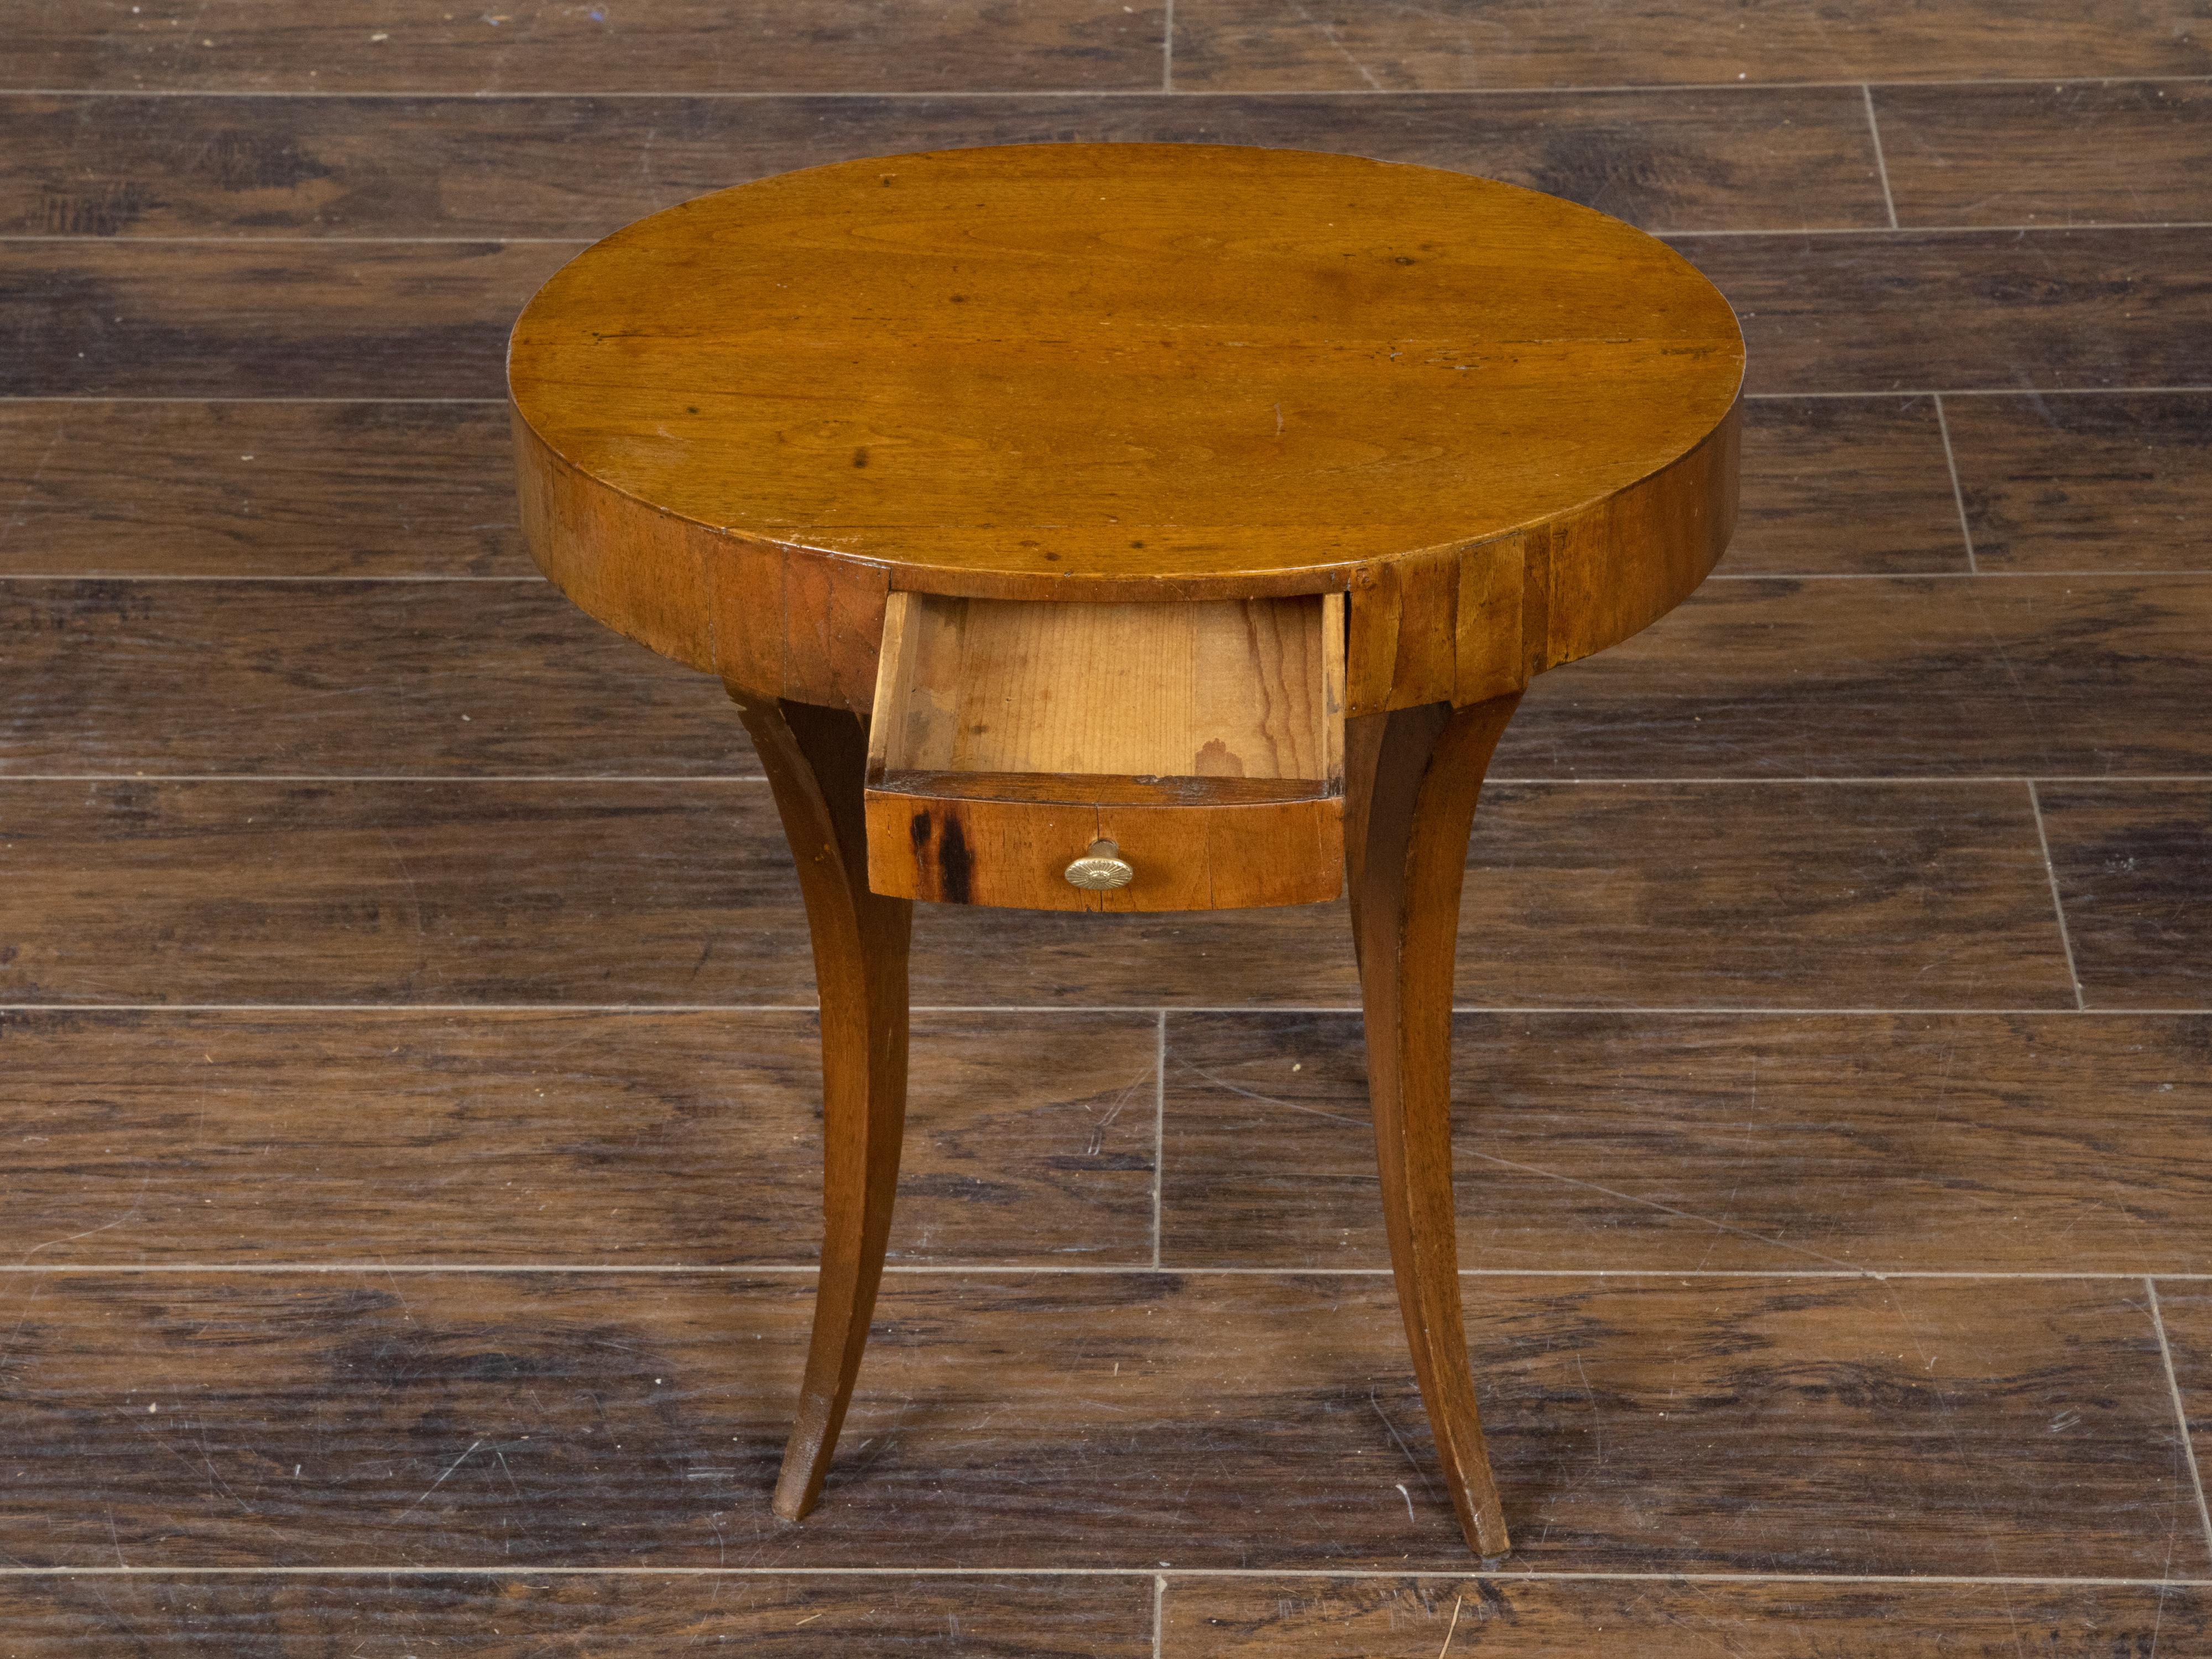 Italian 1810s Neoclassical Walnut Table with Oval Top, Drawer and Saber Legs For Sale 5